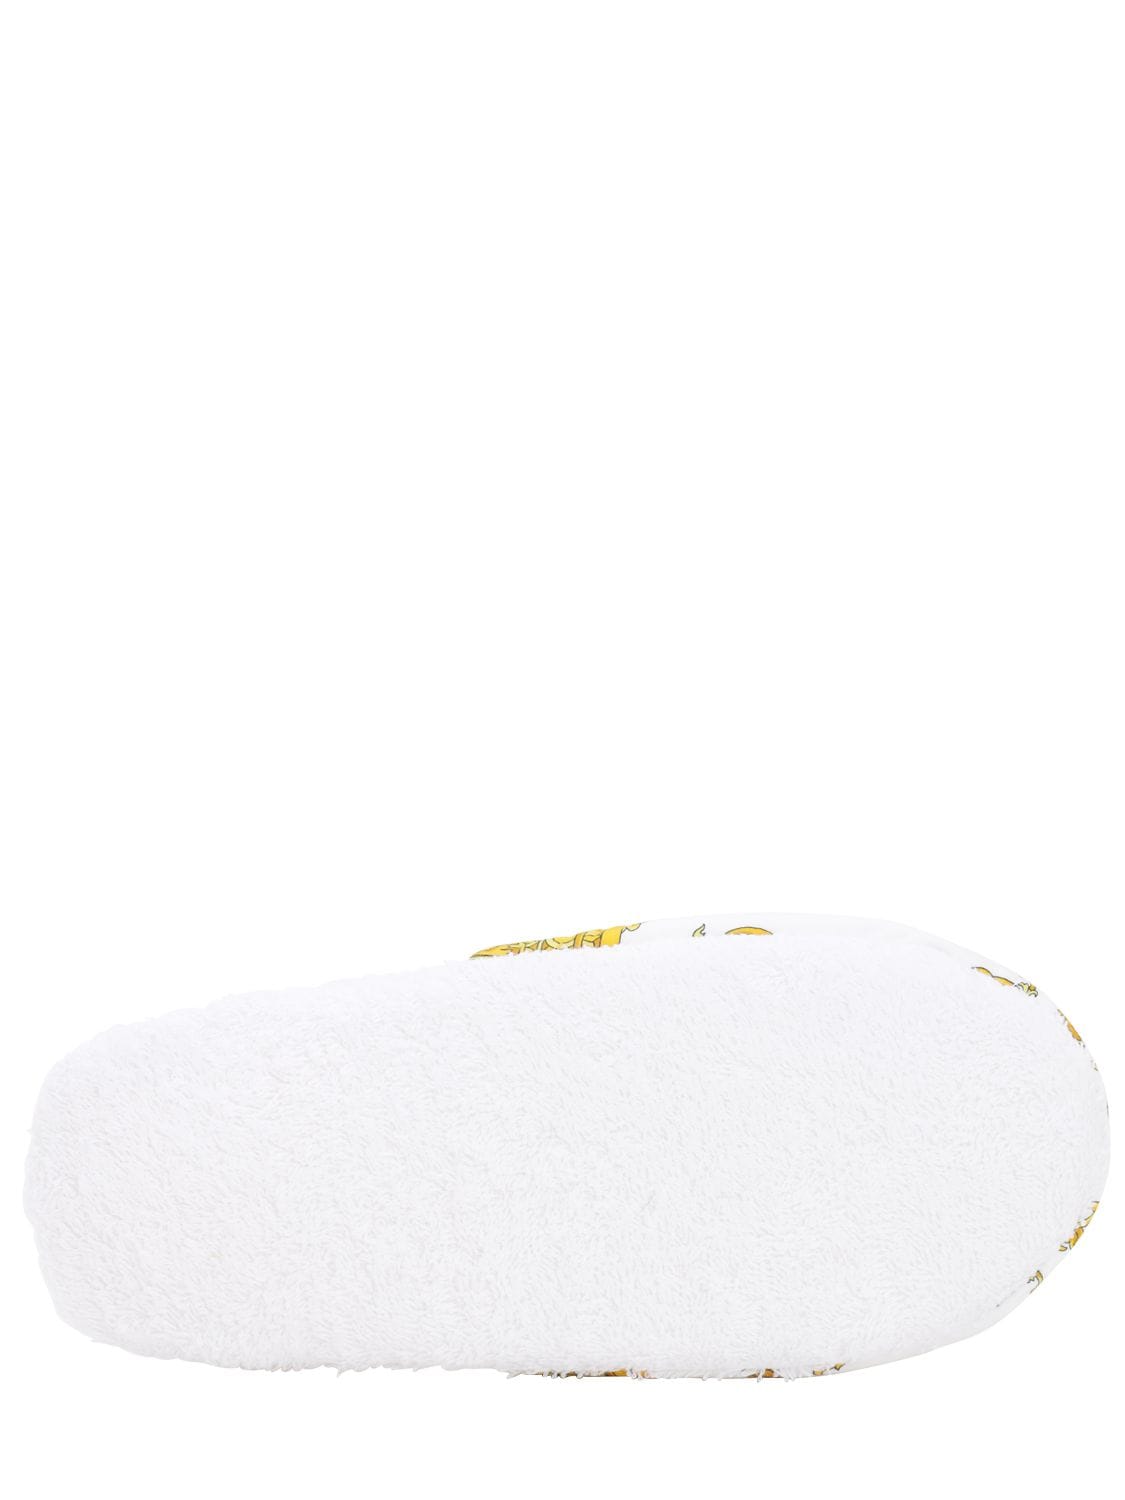 Shop Versace Barocco & Robe Cotton Slippers In White,gold